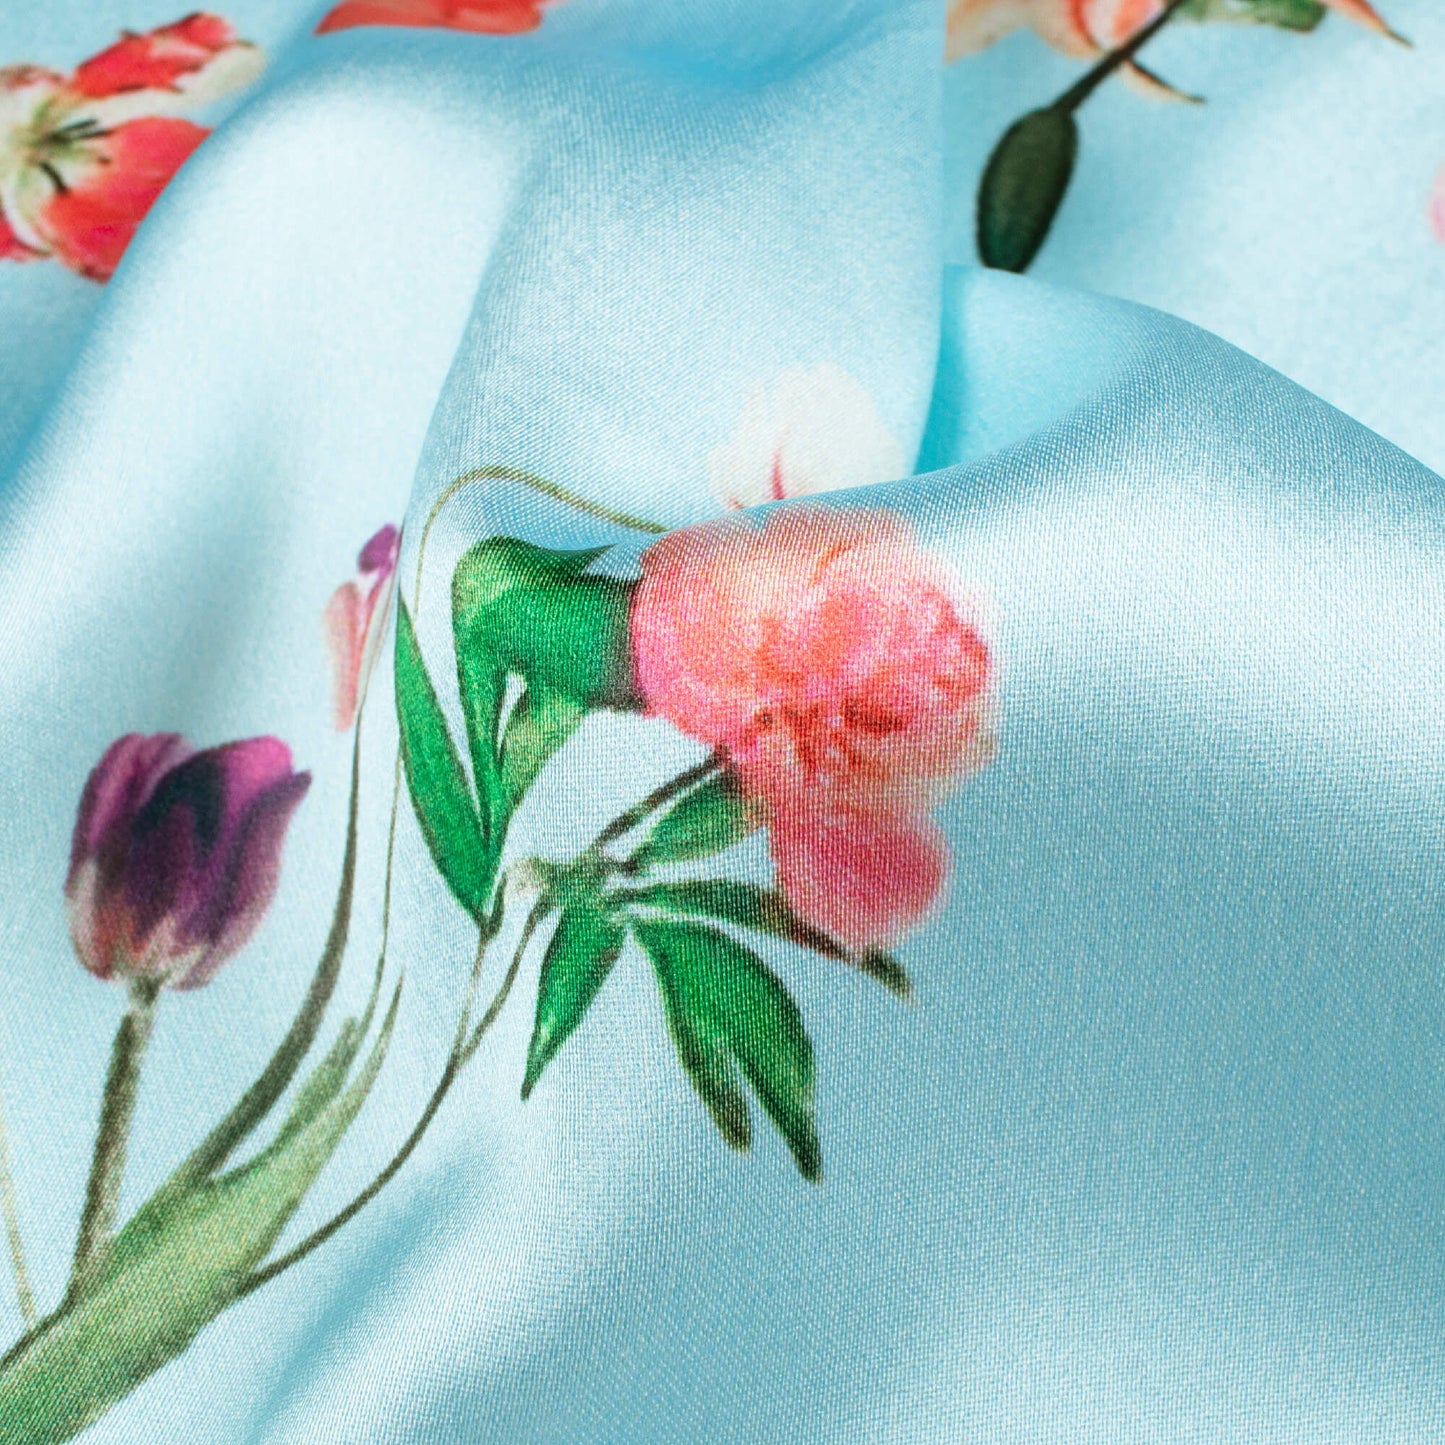 Baby Blue And Red Floral Pattern Digital Print Japan Satin Fabric